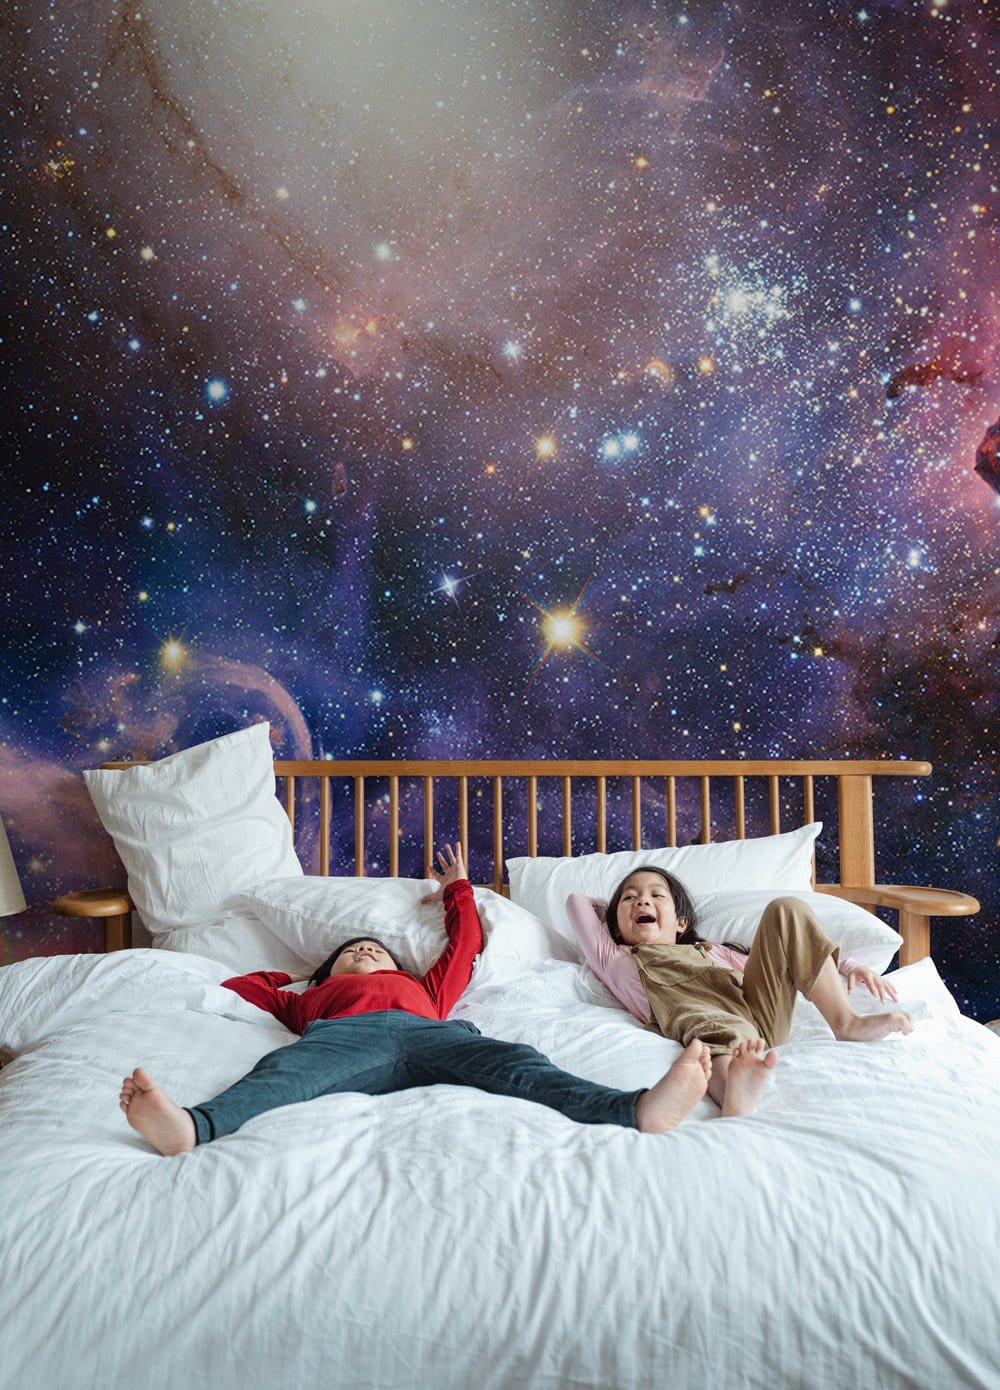 Wallpaper mural with a lovely purple galaxy design for the bedroom.